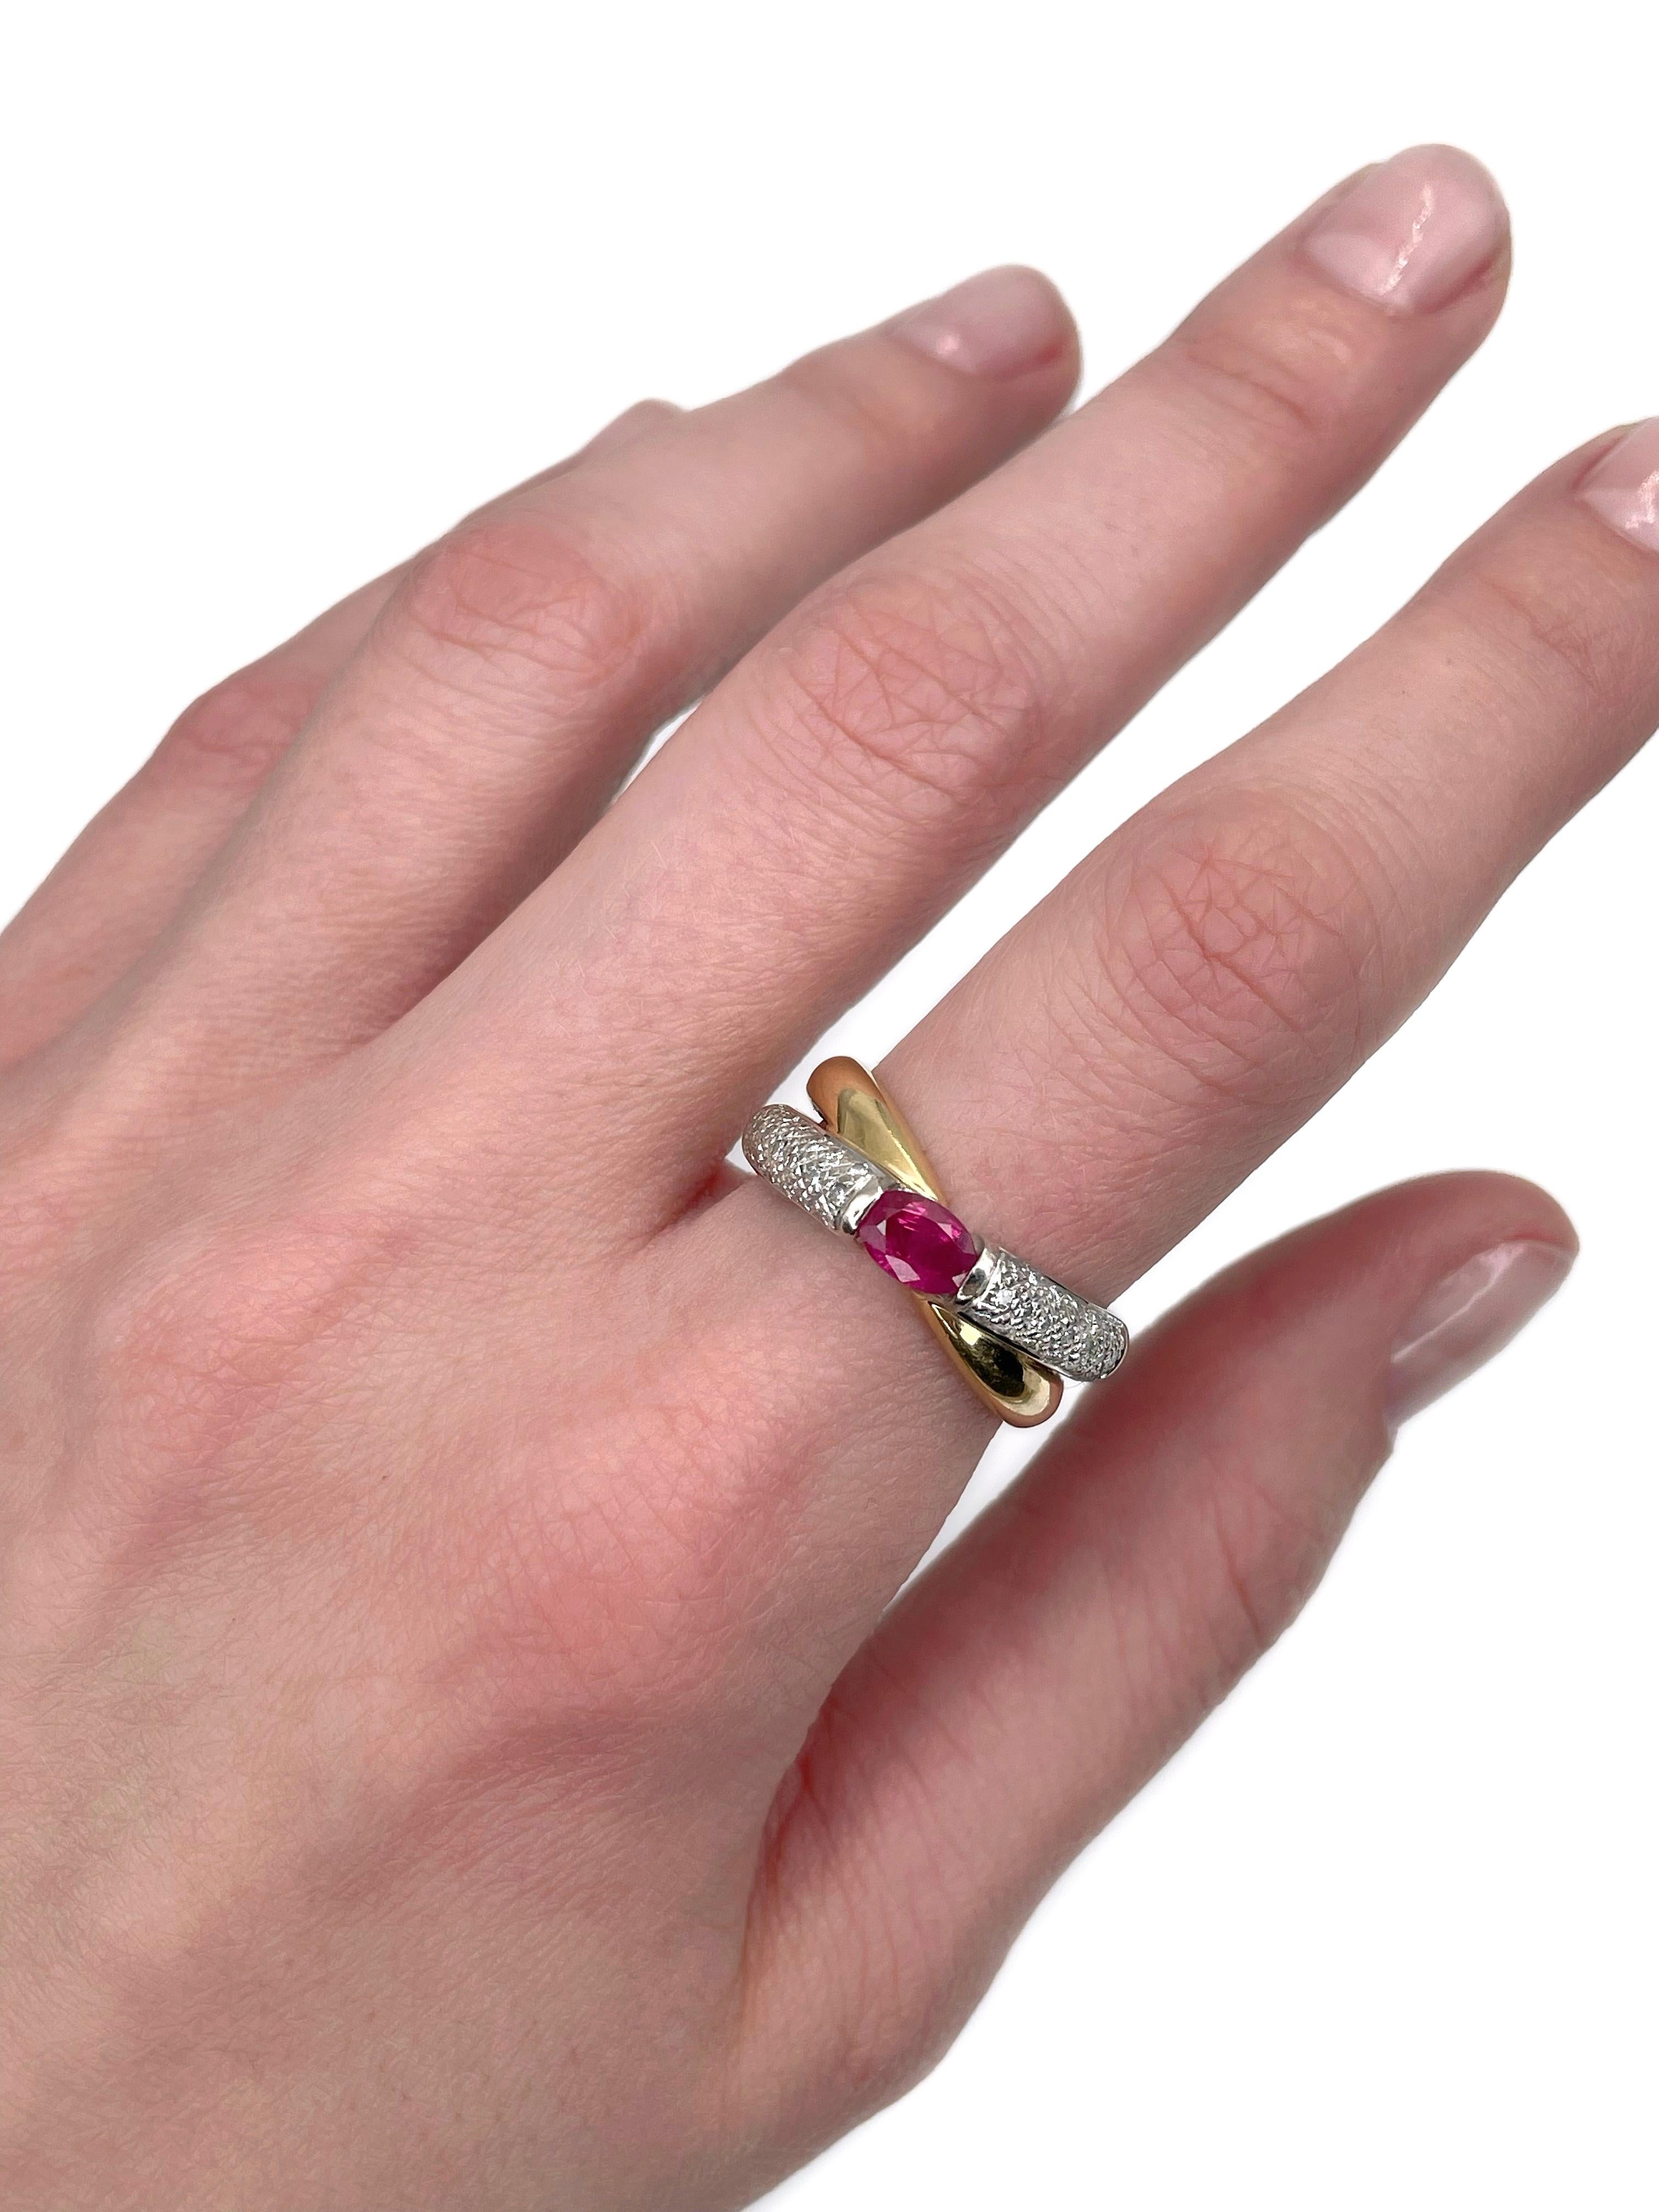 This is a vintage crossover band ring crafted in 18K gold. Circa 1970. 

It features:
- 1 ruby (oval cut, 0.60ct, slpR 6/4, SI)
- 42 diamonds (round brilliant cut, TW 0.21ct, RW-W, VS-SI)

Weight: 7.15g
Size: 17.75 (US 7.5)

IMPORTANT: please ask